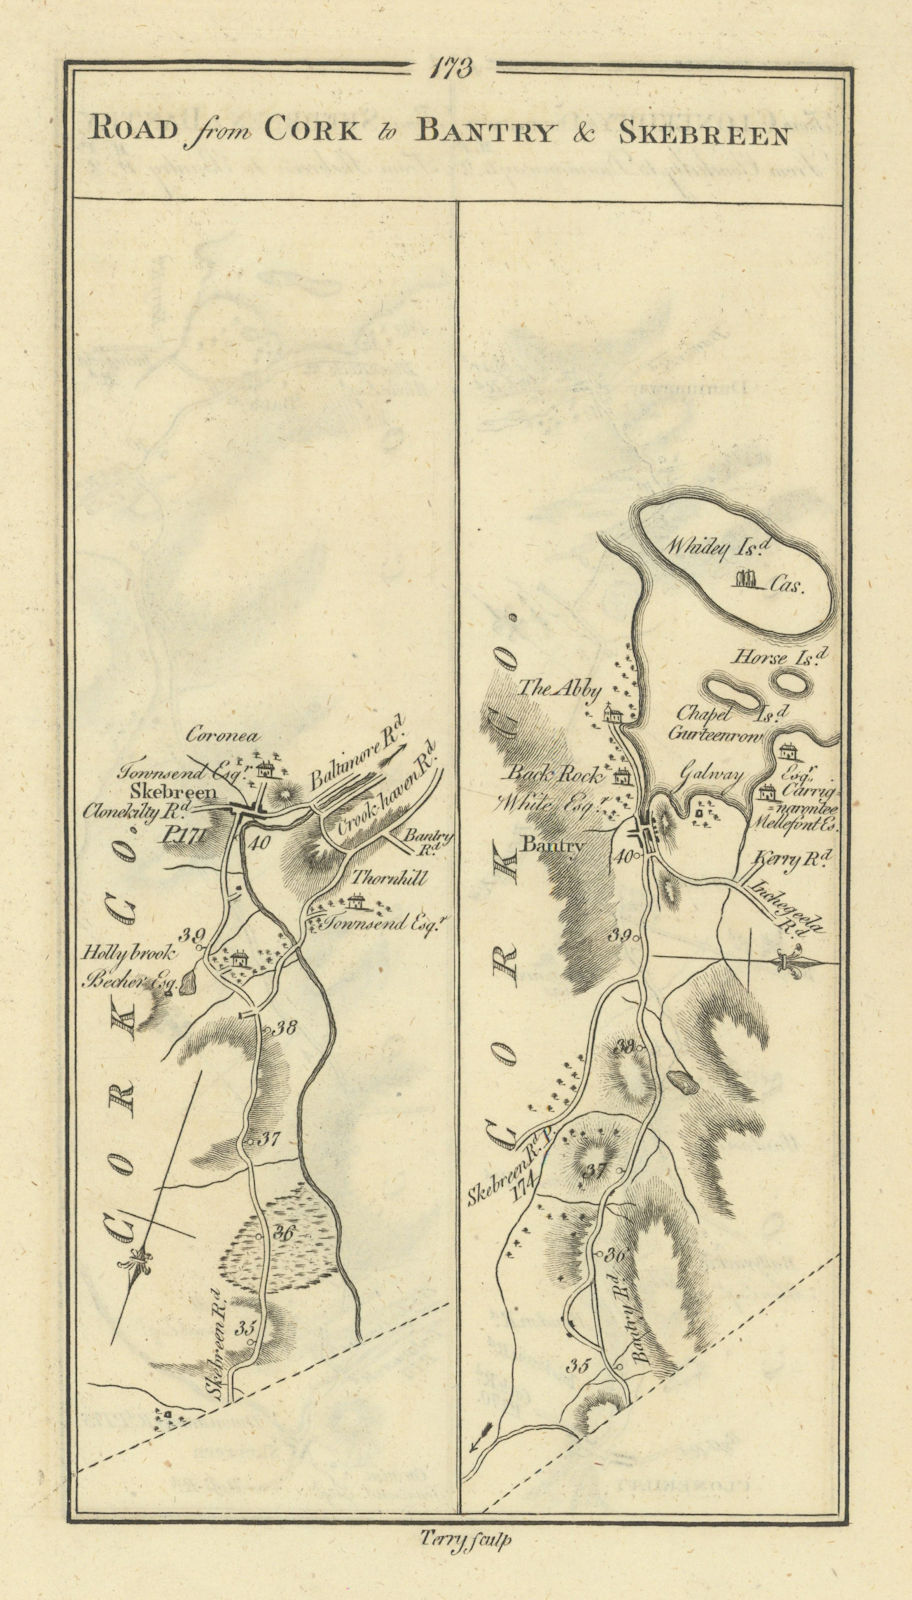 Associate Product #173 Road from Cork to Bantry & Skebreen. Skibbereen. TAYLOR/SKINNER 1778 map